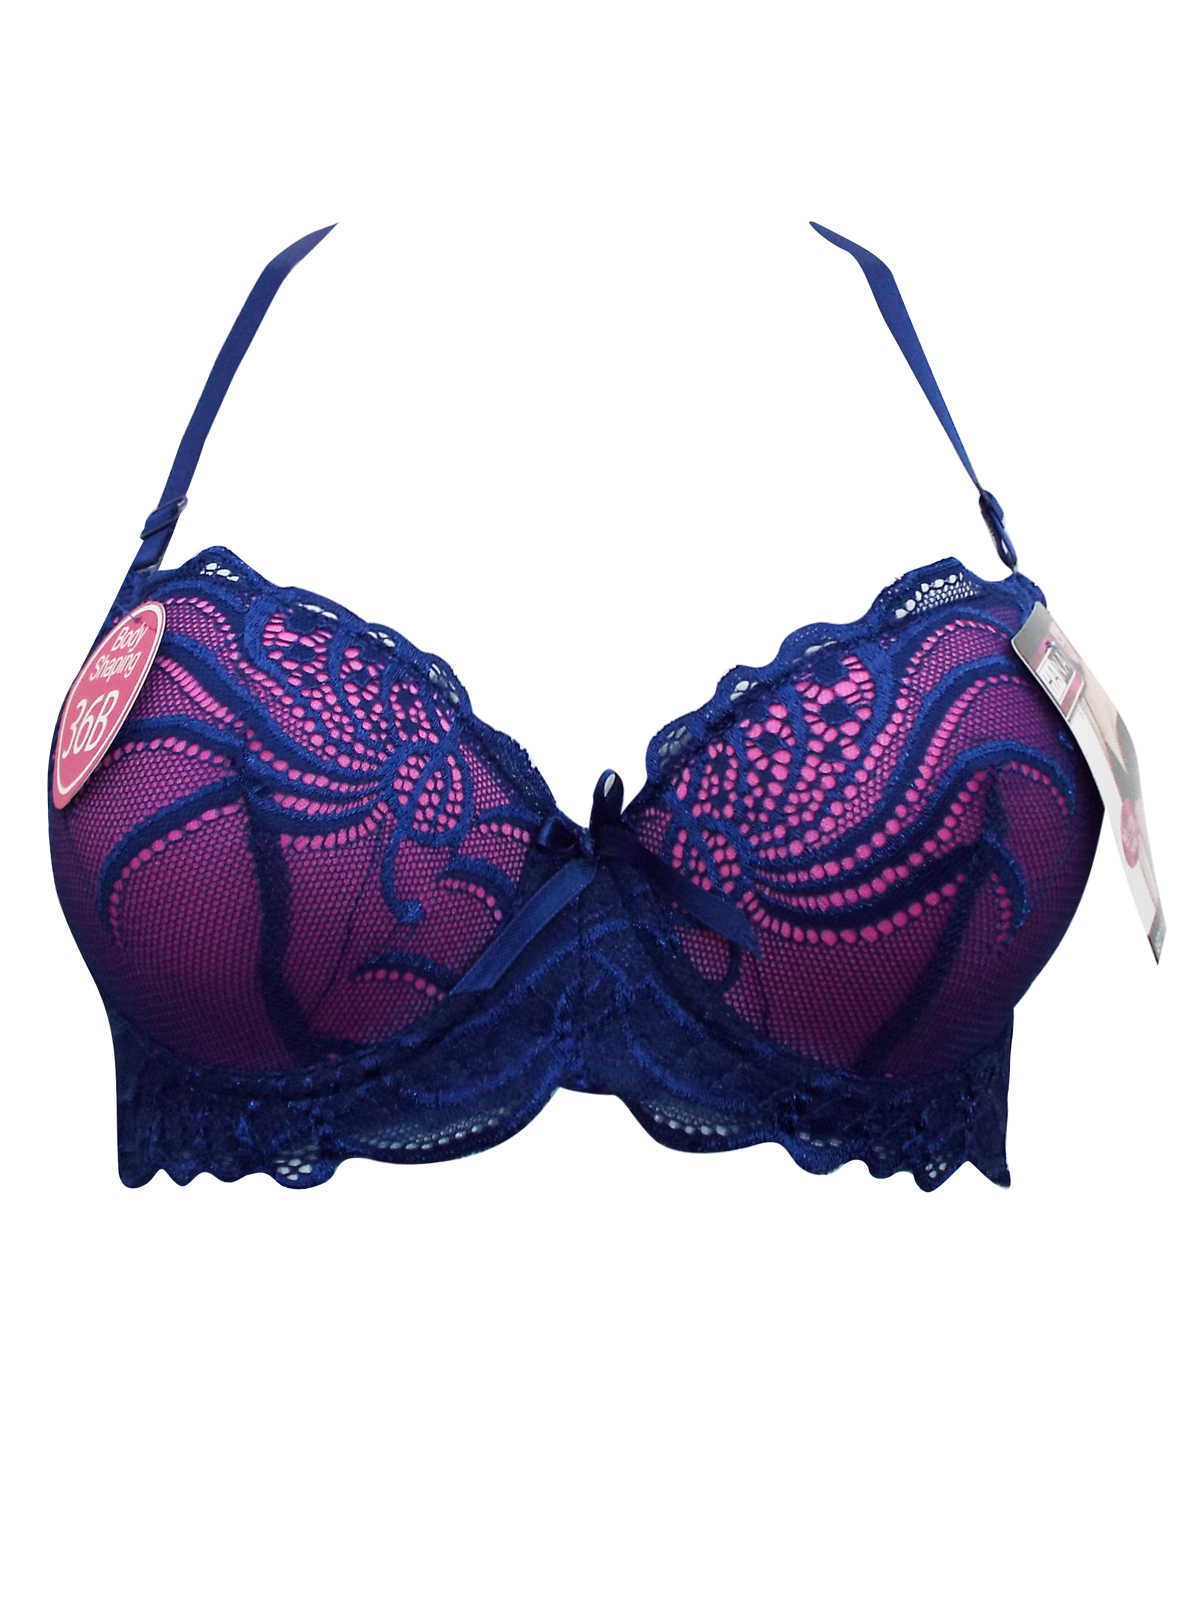 HANA LADIES FLORAL LACE PADDED AND WIRED FULL CUP BRA BLUE C CUP